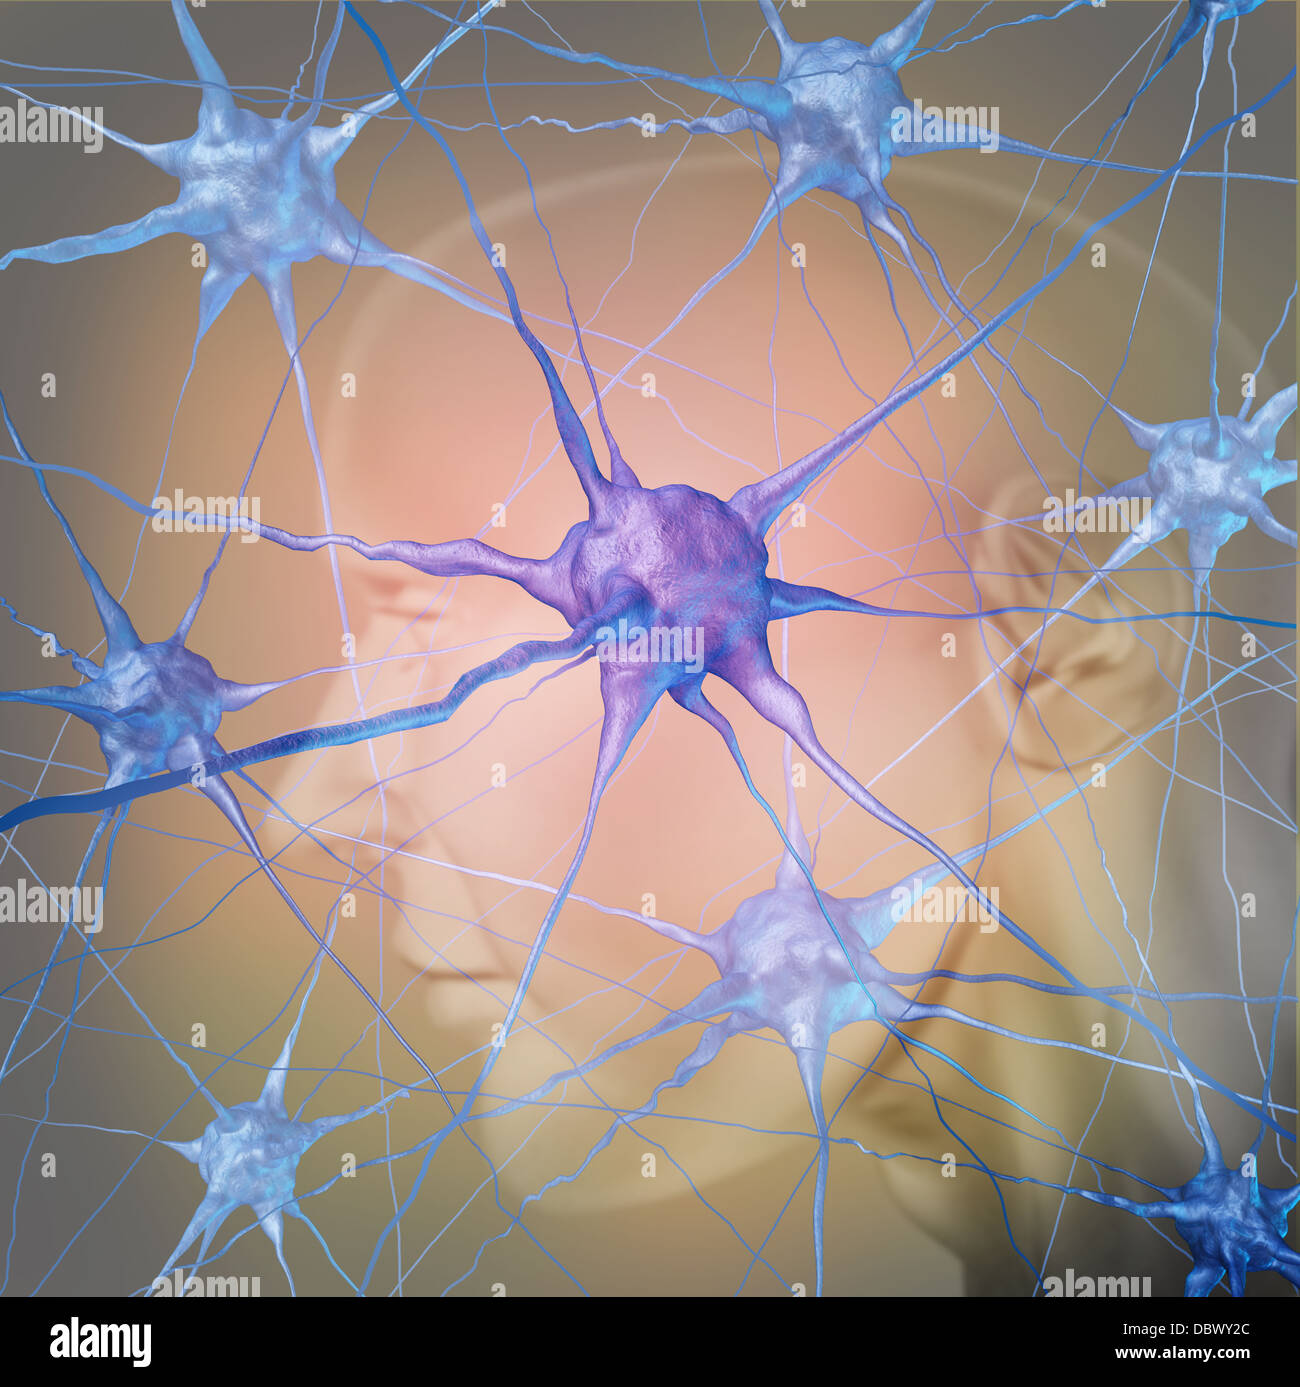 Human neuron cells in the brain as a medical symbol representing psychology and the science of neurology research in finding treatment for mental health diseases as alzheimer dementia and autism. Stock Photo